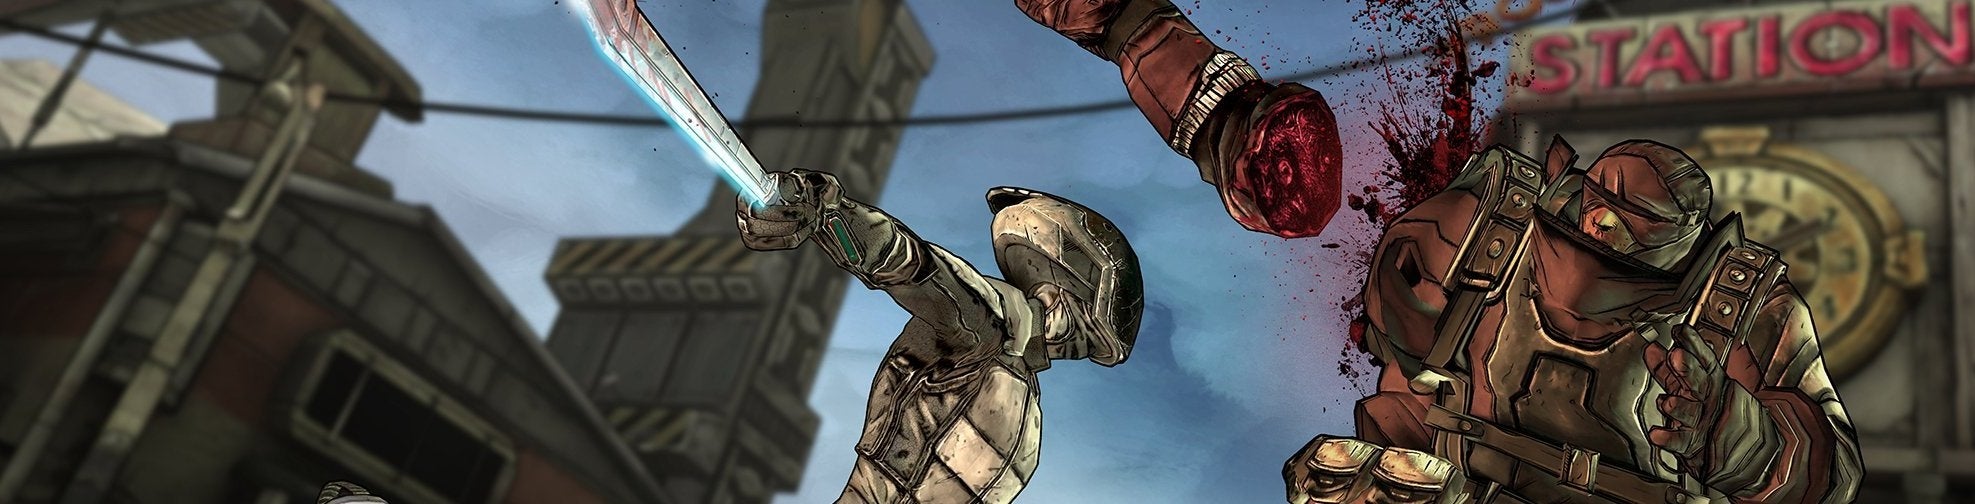 Image for Drobky o Tales from Borderlands